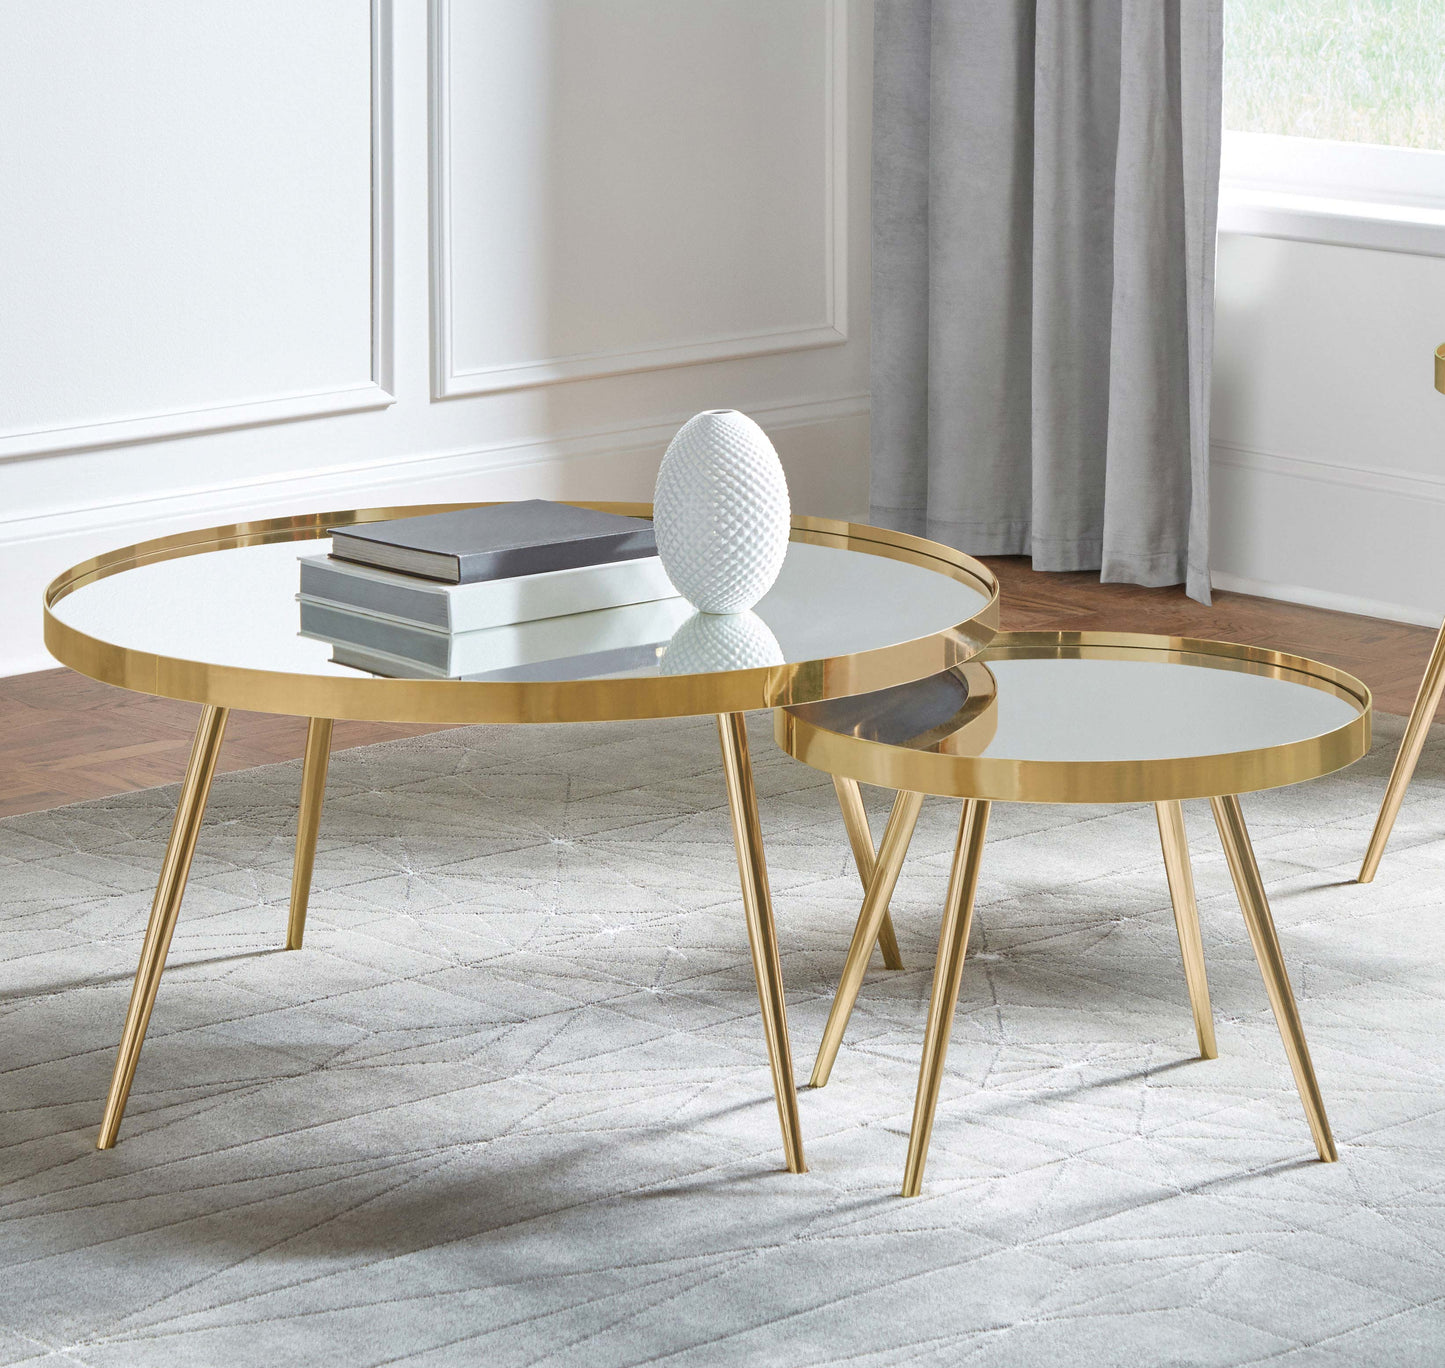 Kaelyn 2-piece Round Mirror Top Nesting Coffee Table Gold